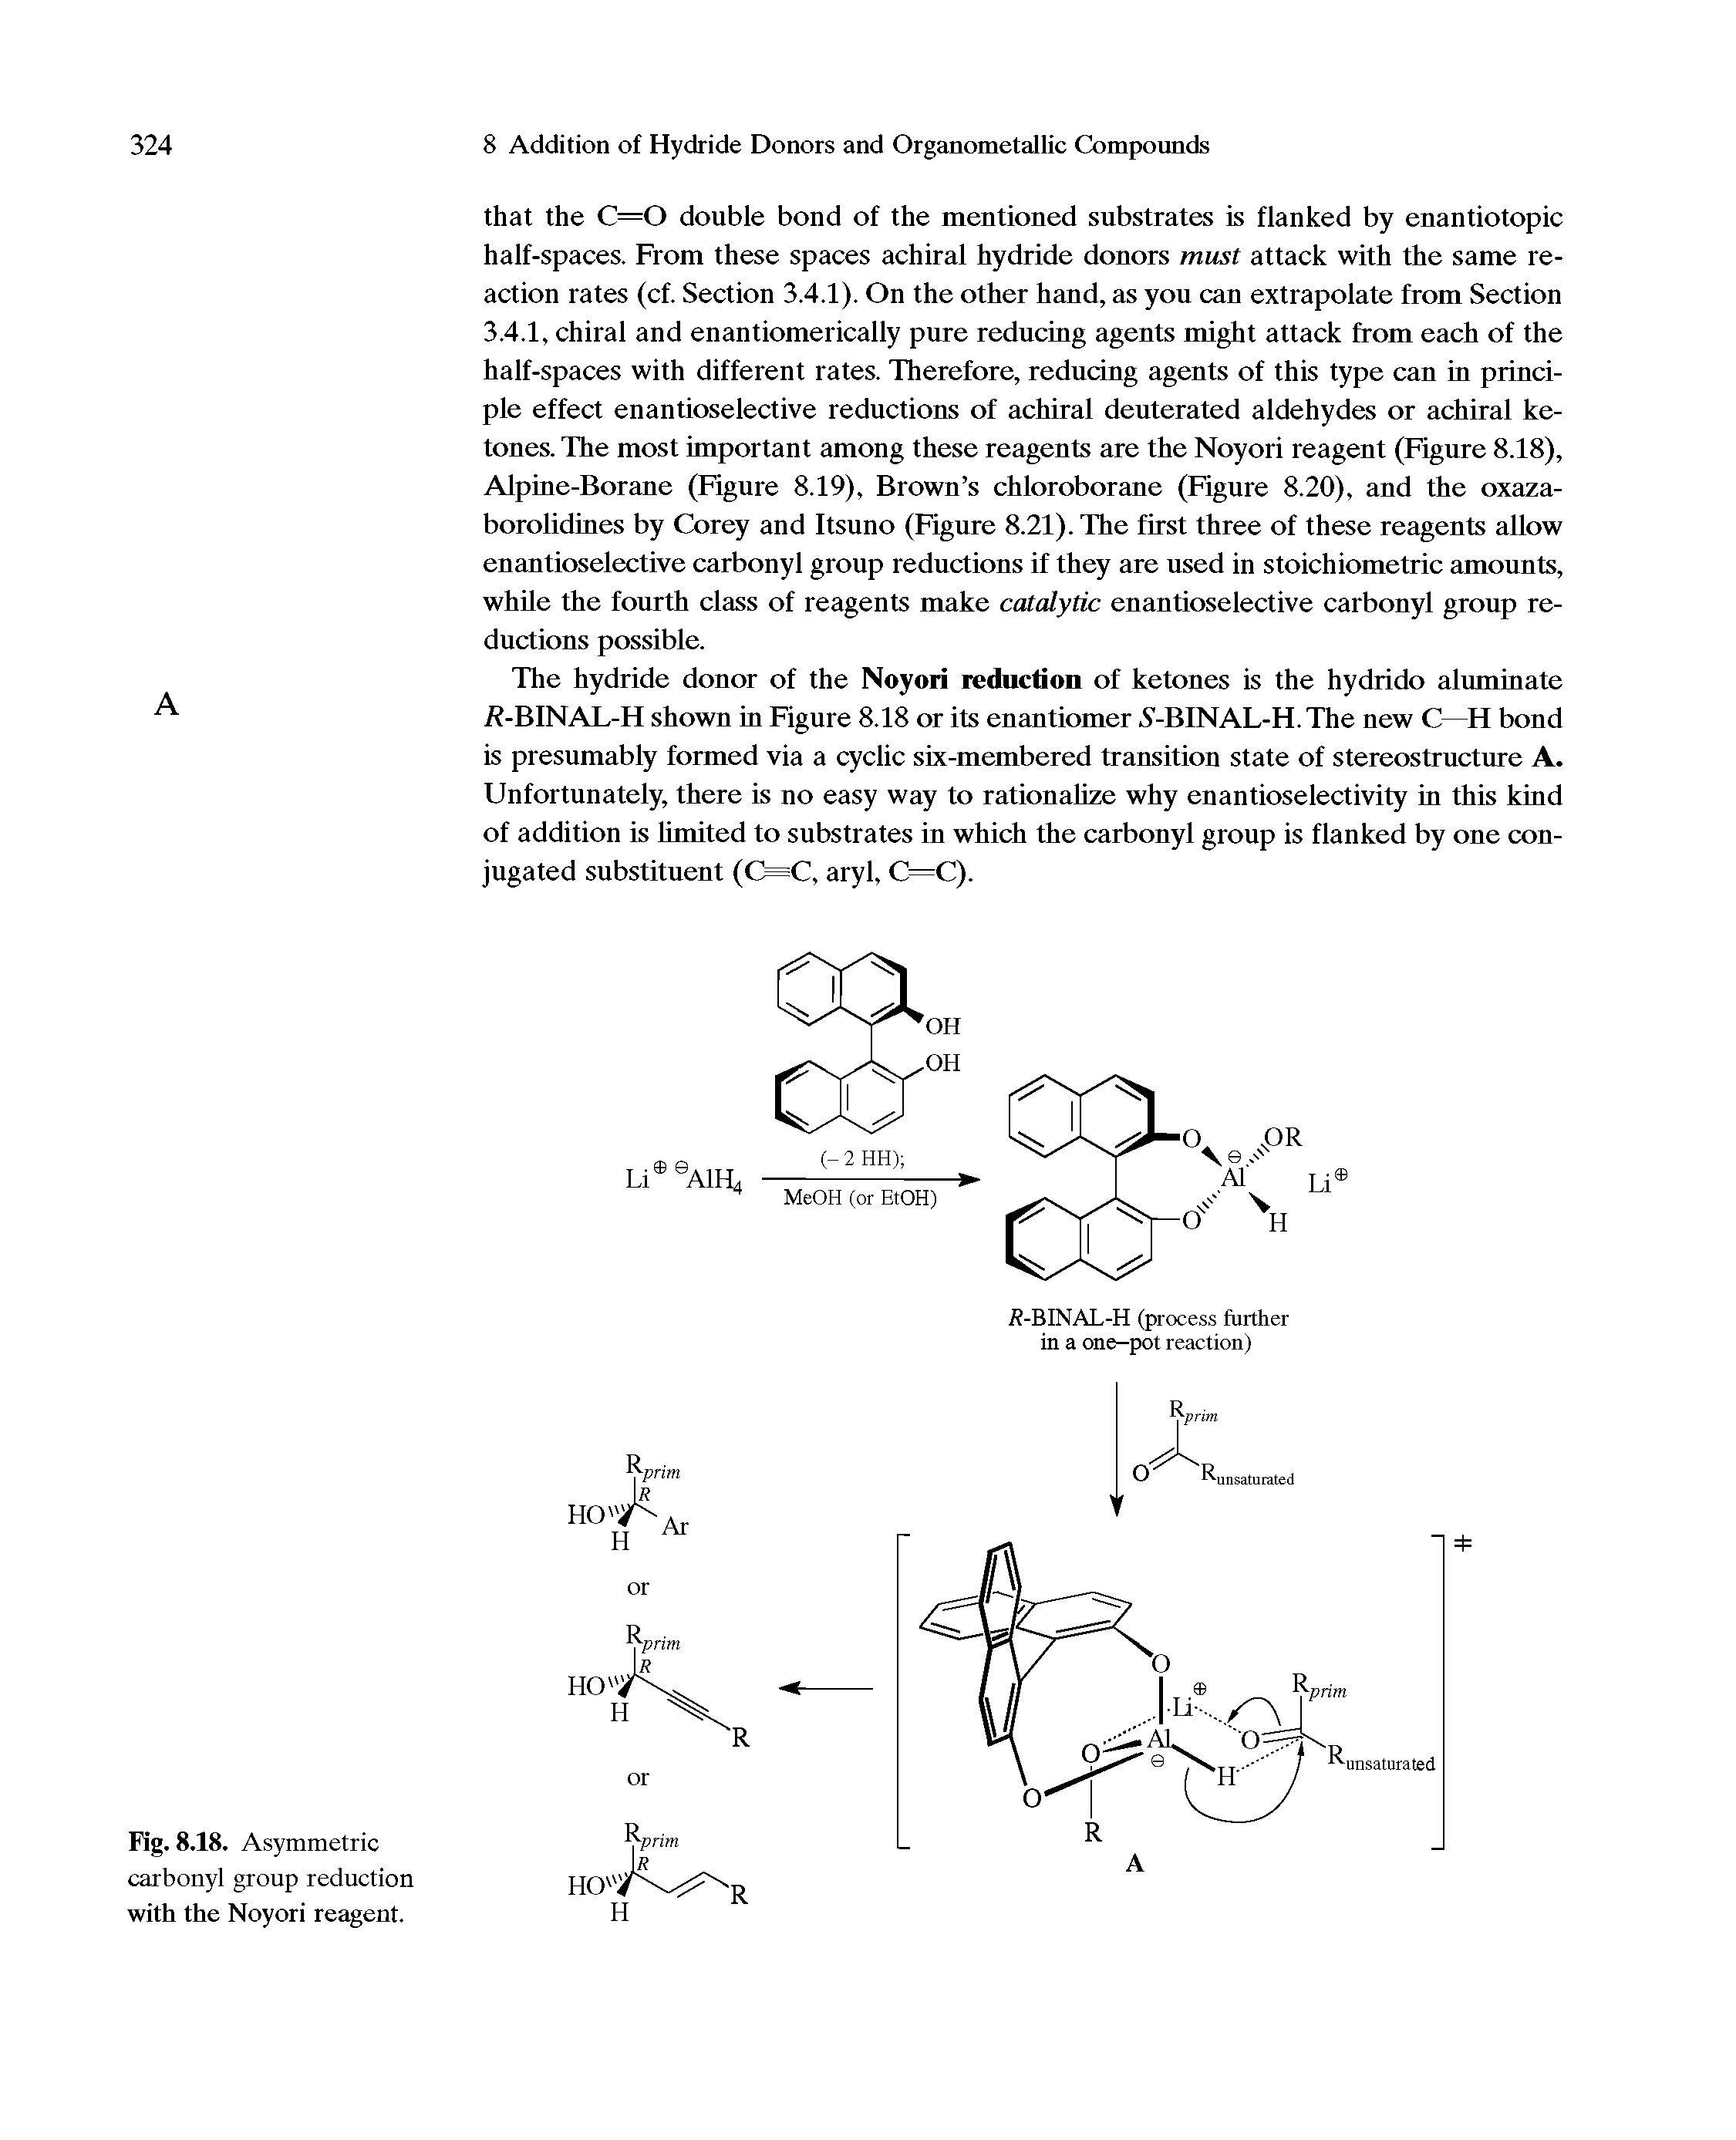 Fig. 8.18. Asymmetric carbonyl group reduction with the Noyori reagent.